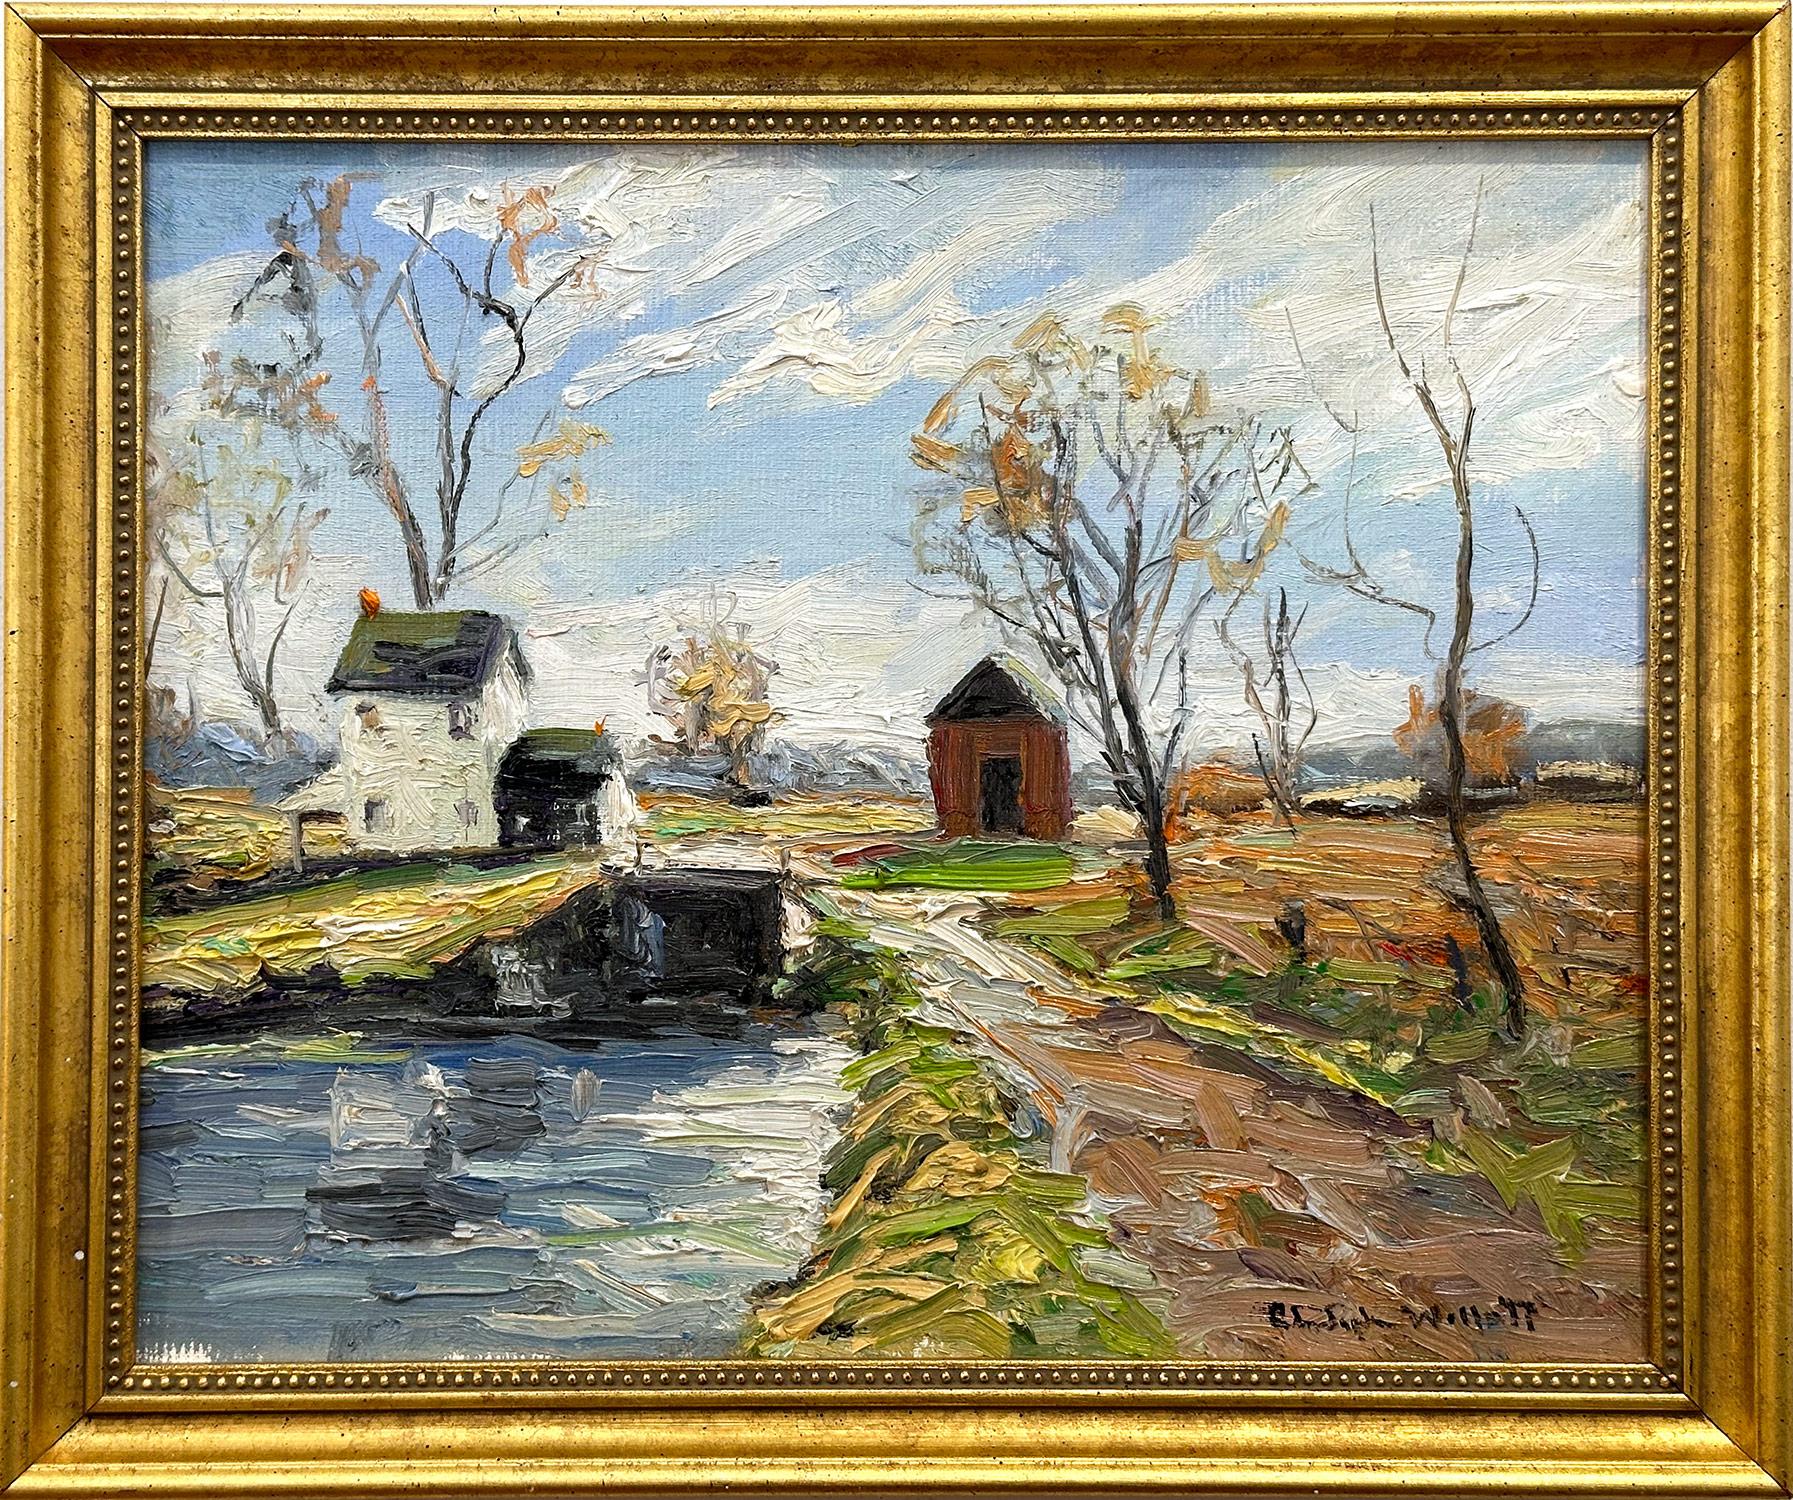 Christopher Willett Landscape Painting - "House by the Stream" Pastoral Summer Countryside Landscape Oil Painting Framed